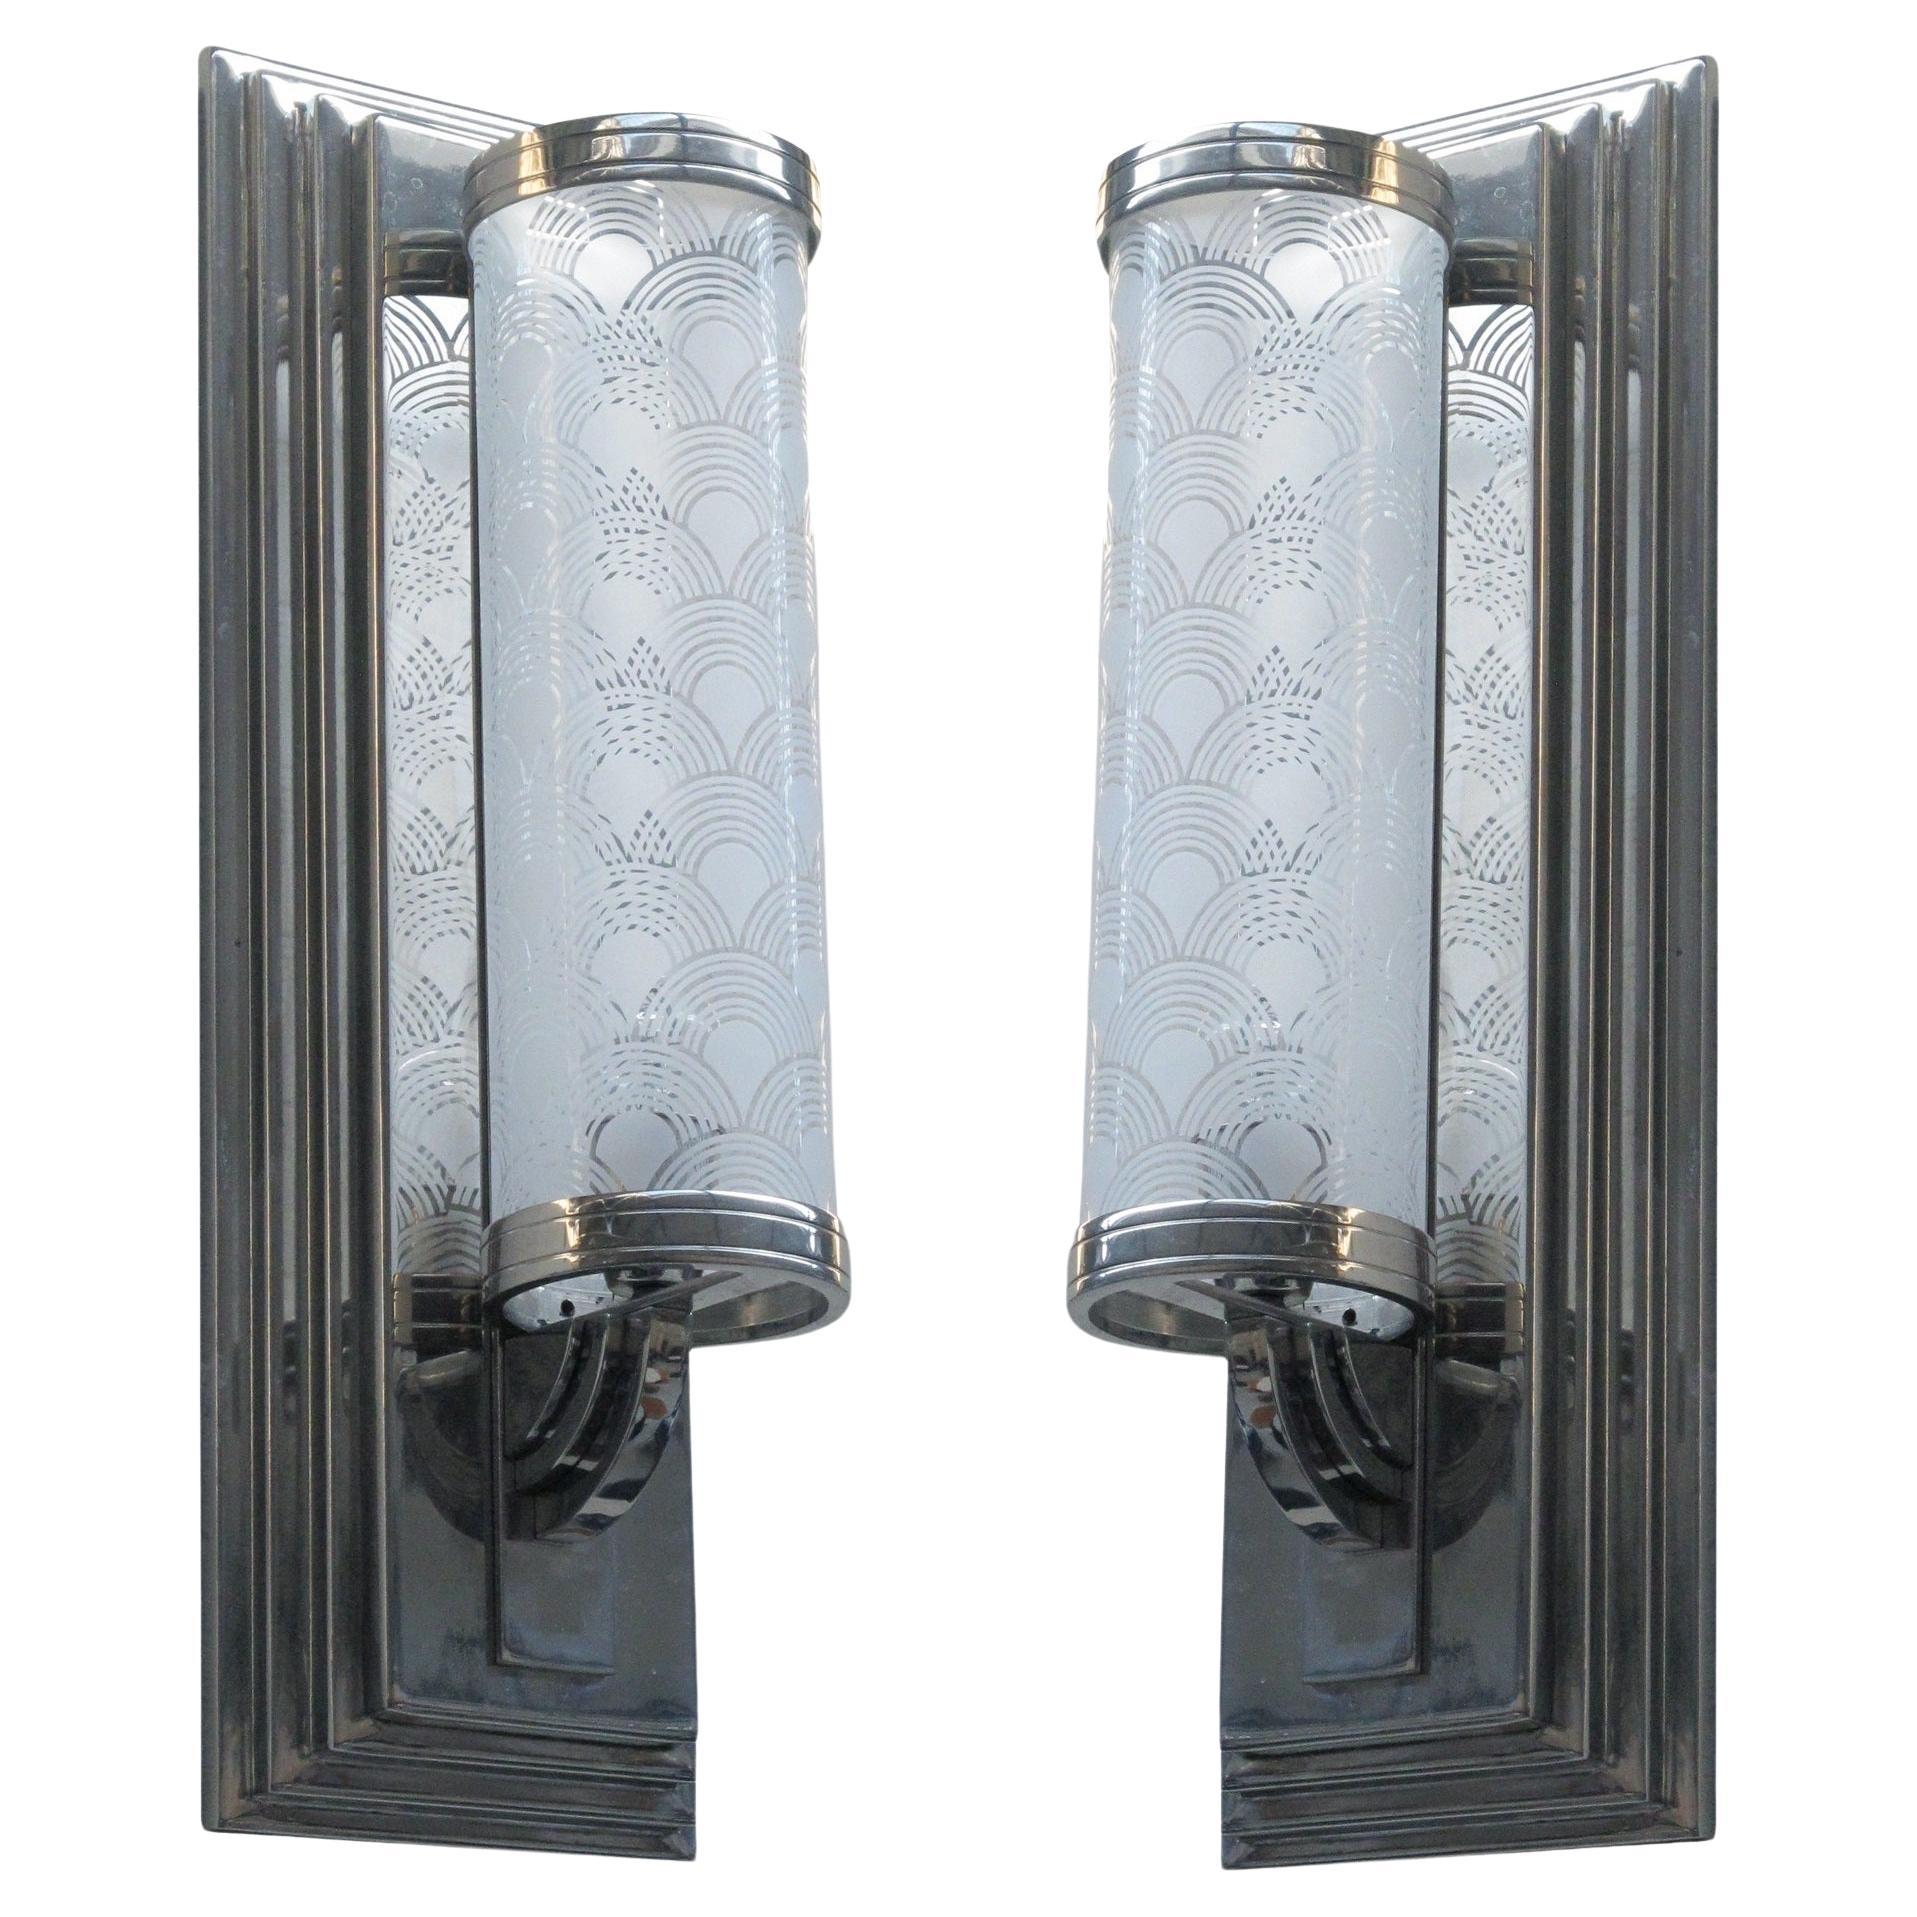 2 Big Sconces in Chrome and Glass, Style, Art Deco, Year, 1930, German For Sale